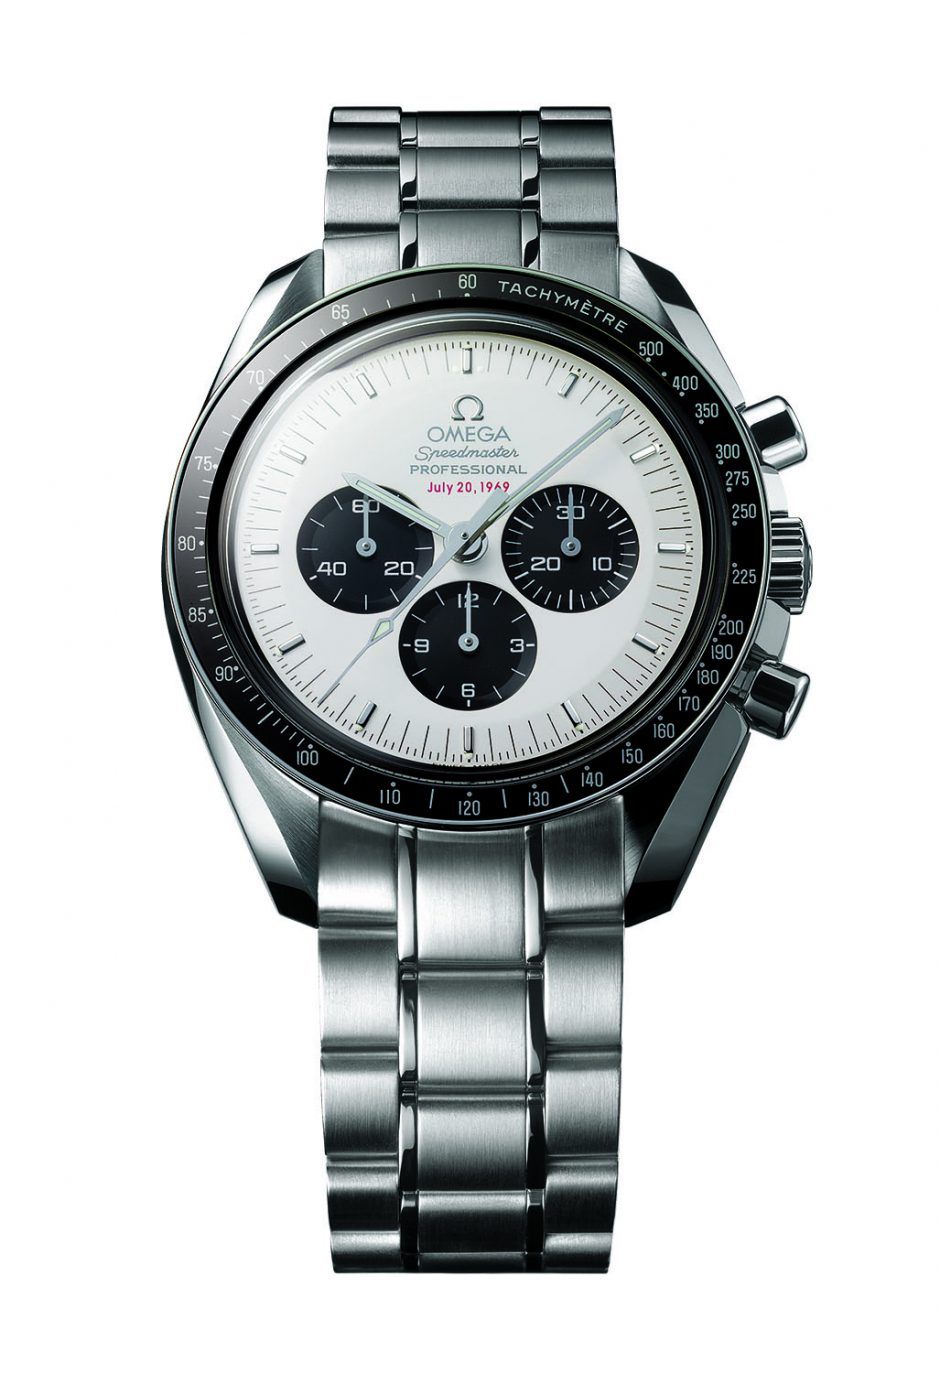 Six Decades of Omega Speedmaster, Part 5: 2000 - 2010 | WatchTime - USA ...